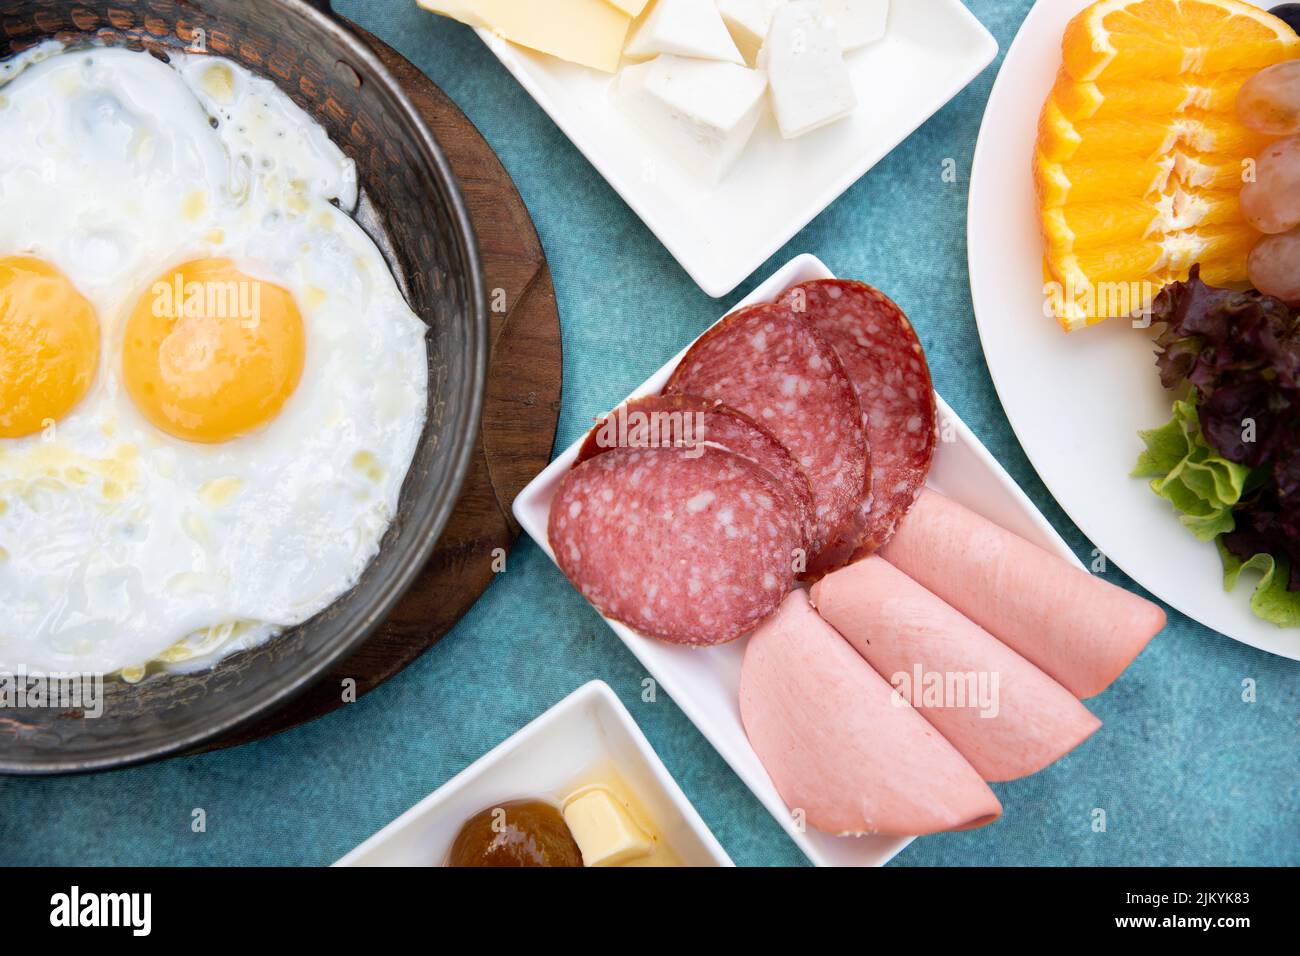 A top view of a breakfast table with sunny side up eggs in a pan and cheeses, cured meats, and fruits Stock Photo